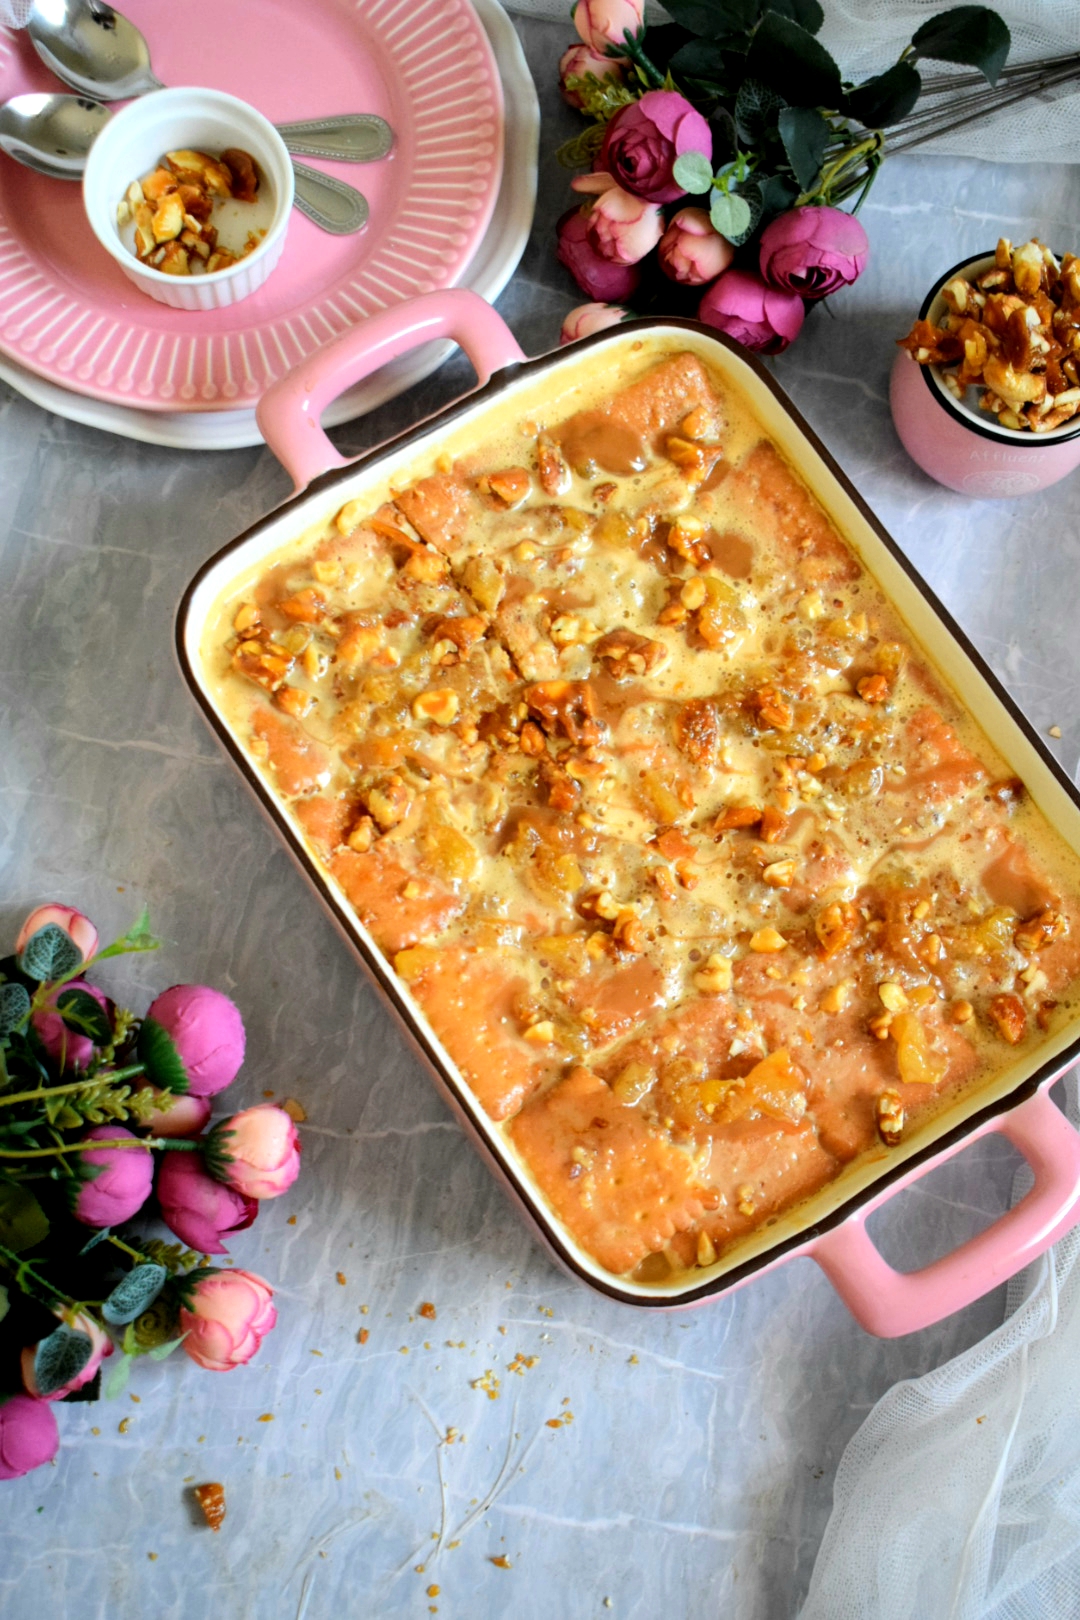 Toffee Pineapple Pudding